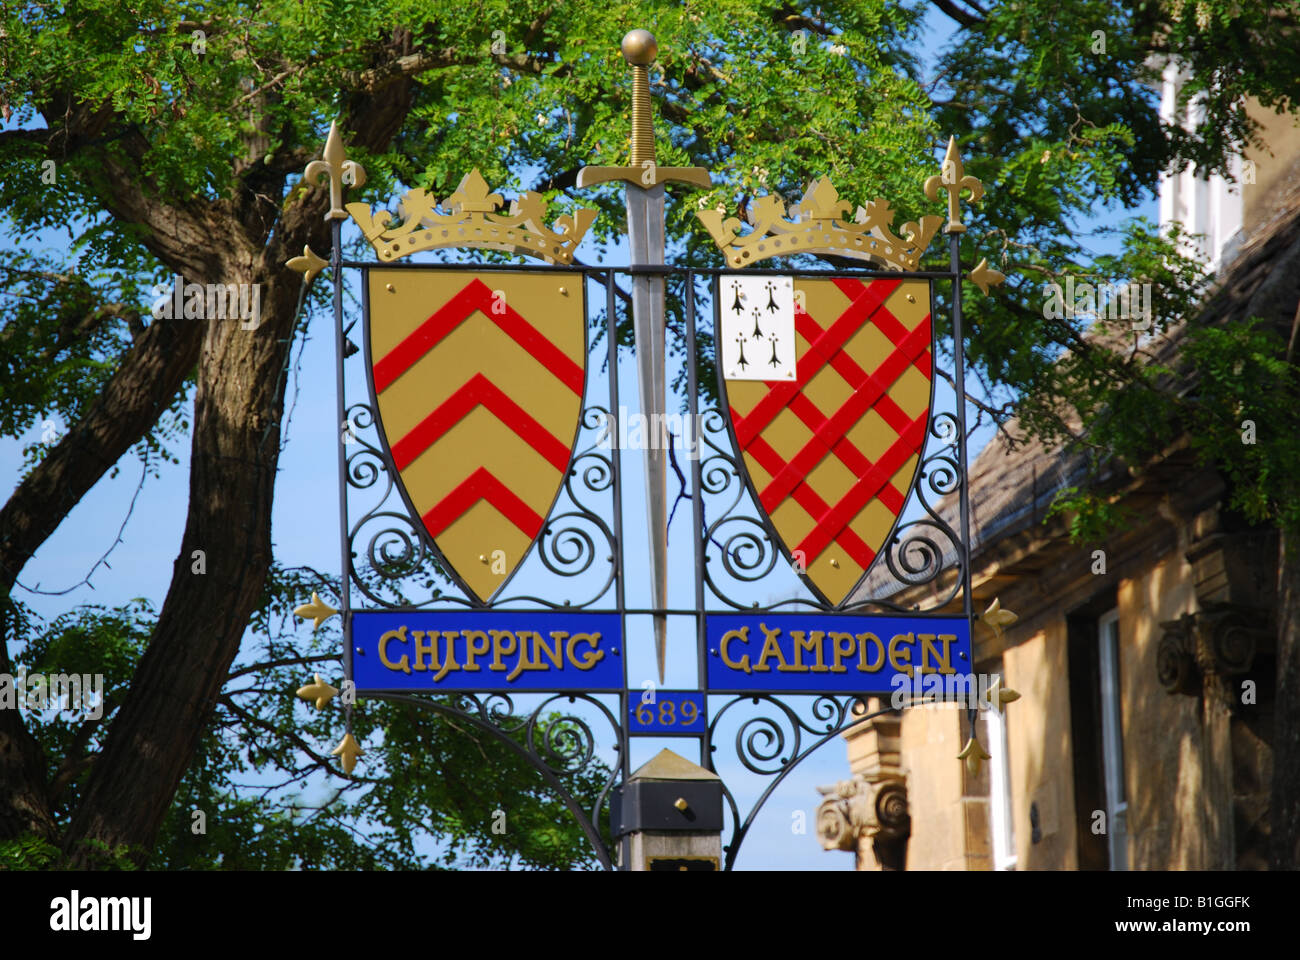 Chipping Campden town signe, High Street, Chipping Campden, Cotswolds, Gloucestershire, Angleterre, Royaume-Uni Banque D'Images